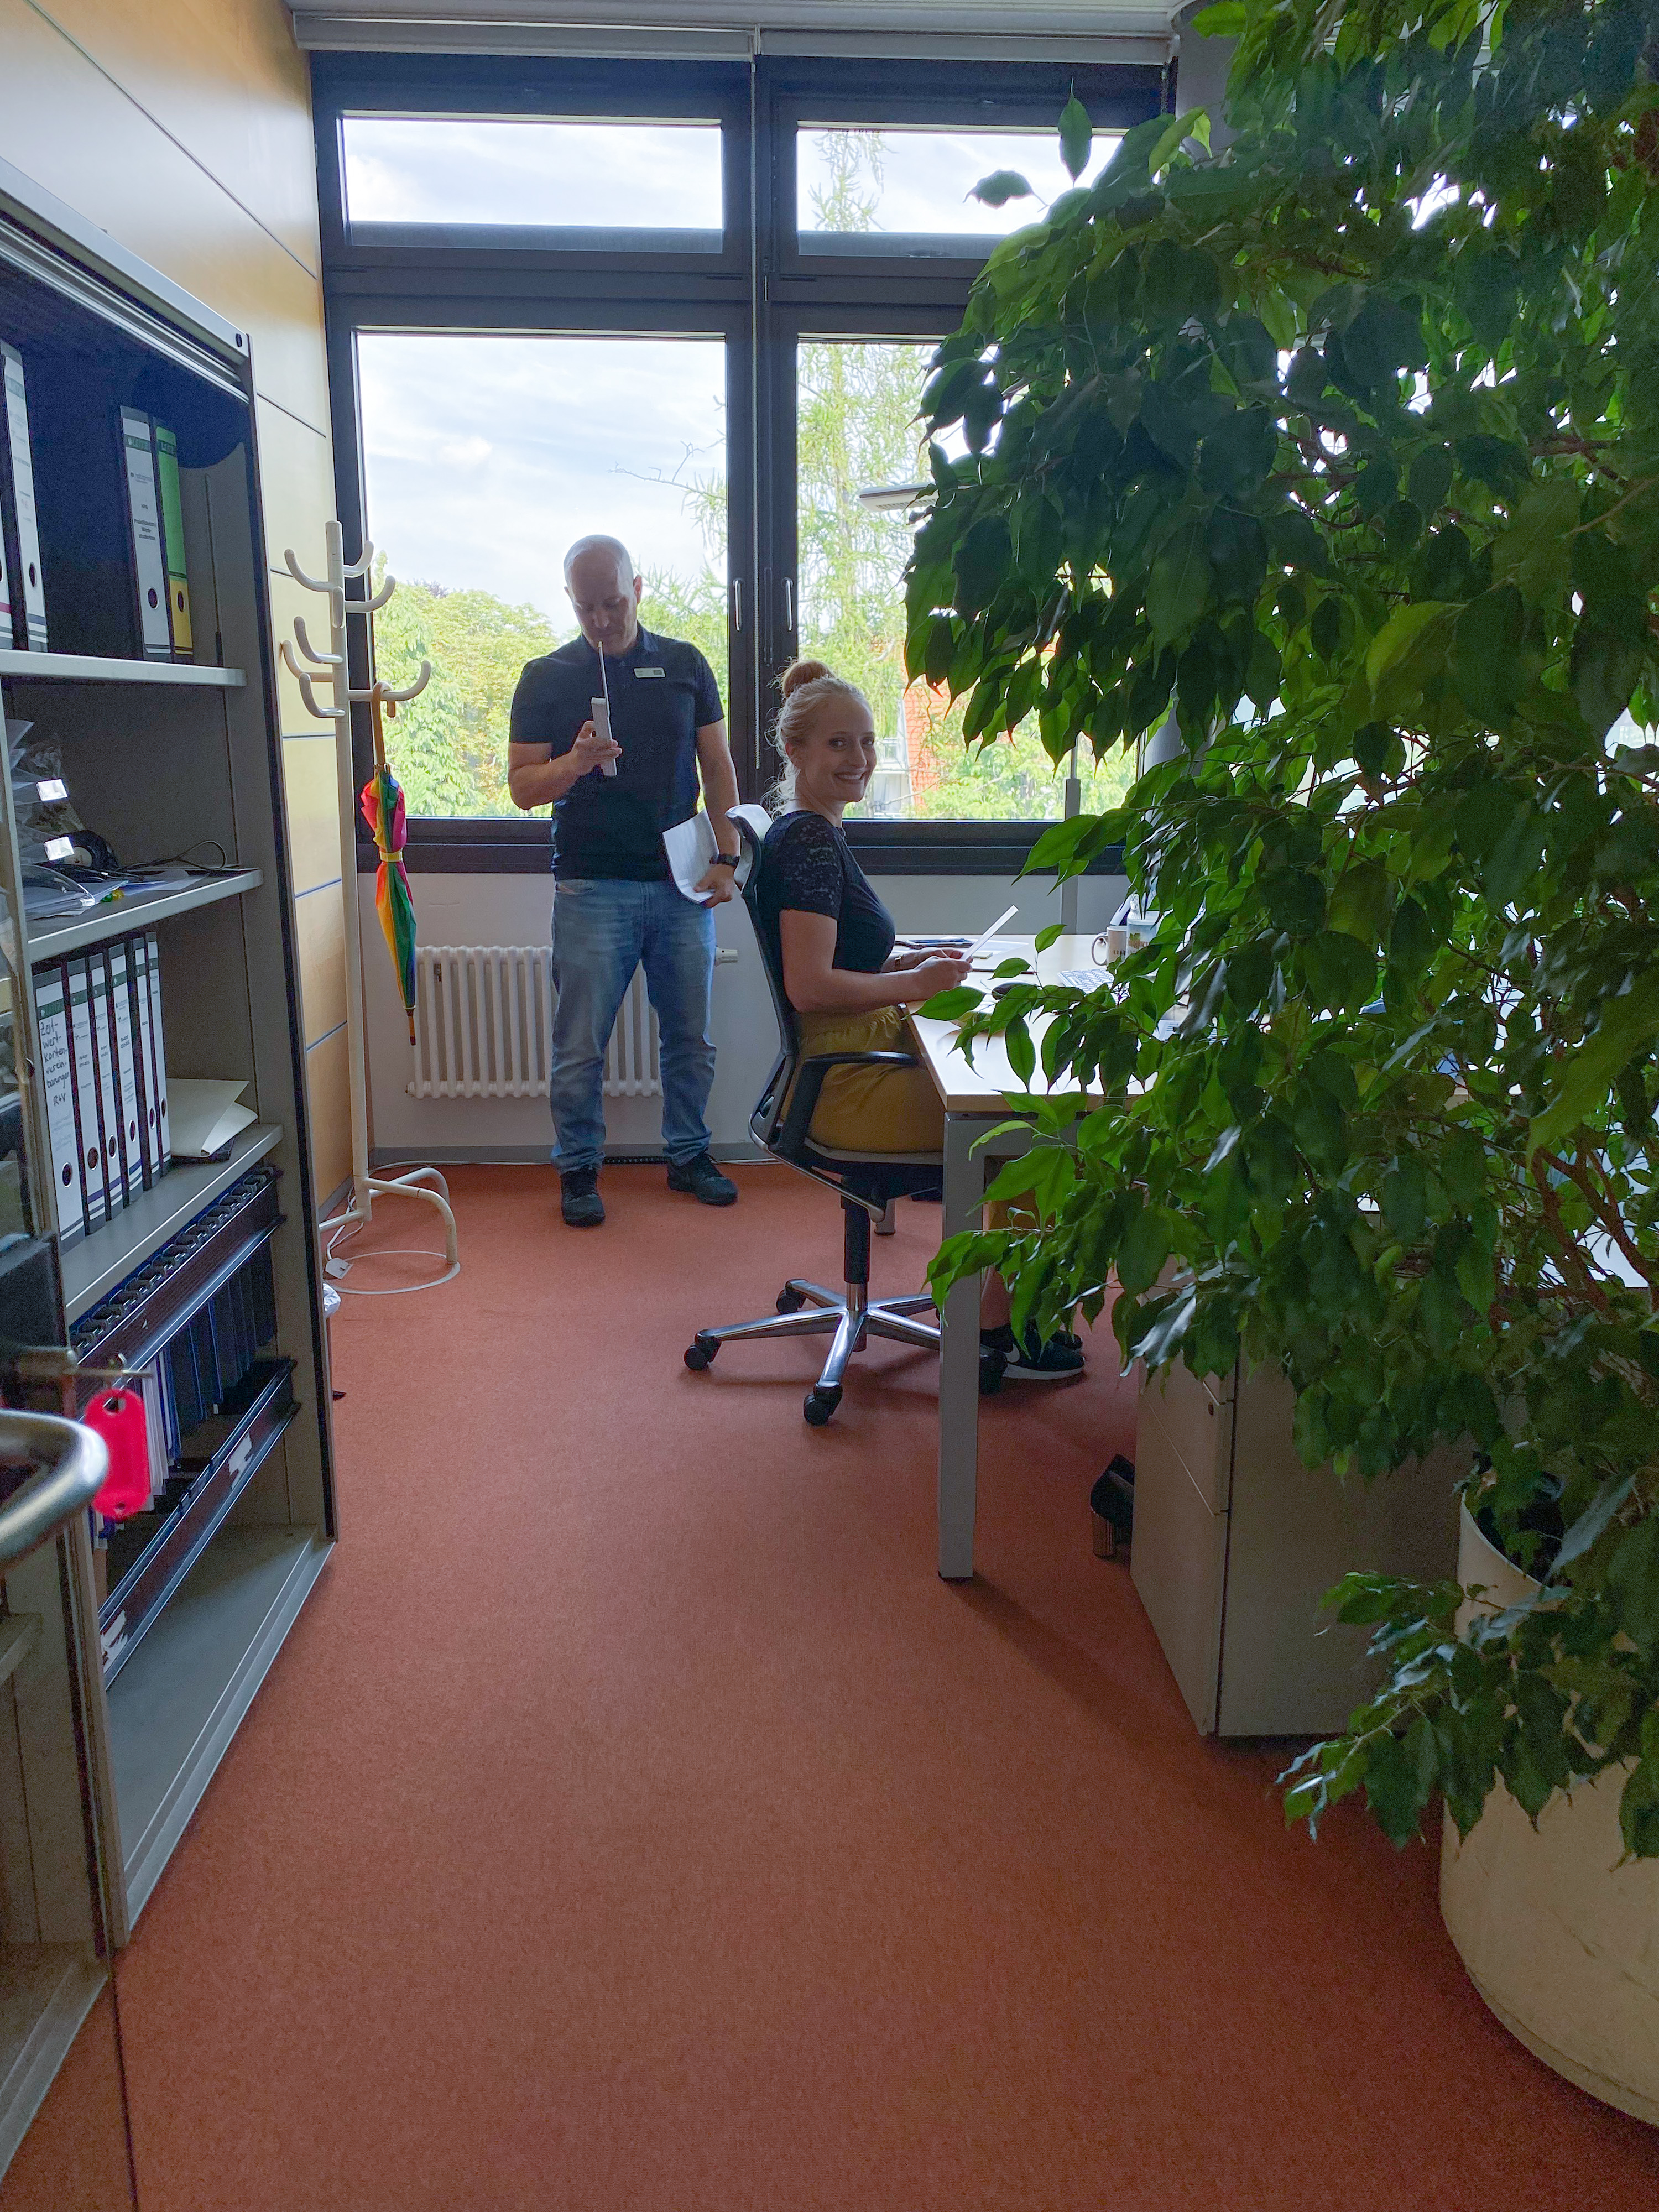 A trainer shows our colleague how to improve her posture while working at her desk